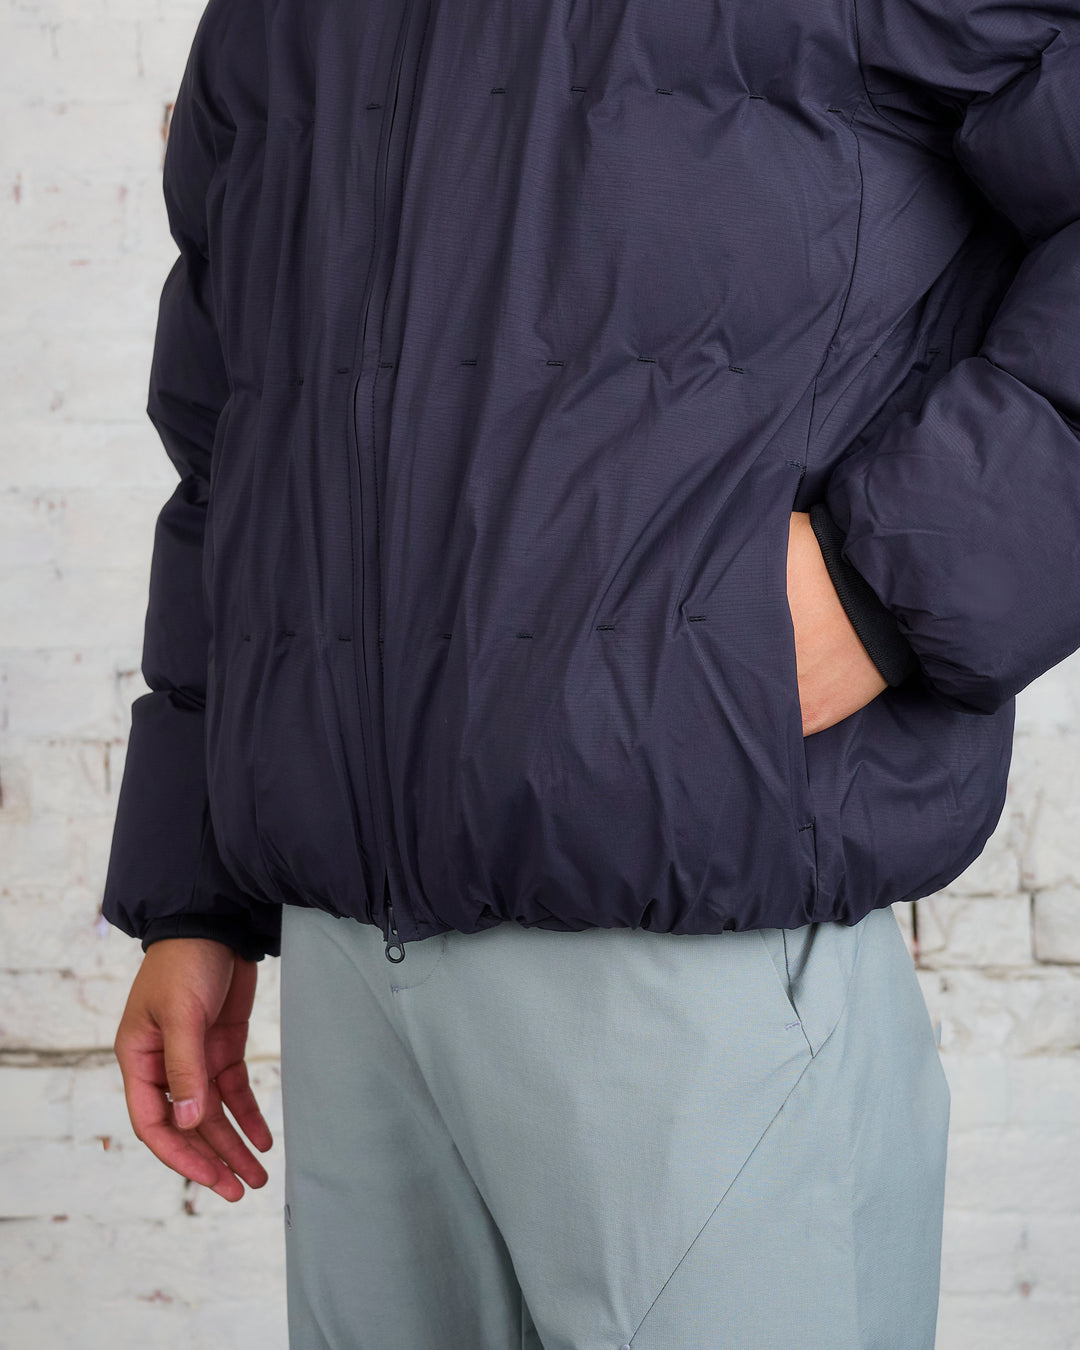 POST ARCHIVE FACTION (PAF) 5.1 Down Right Jacket Black